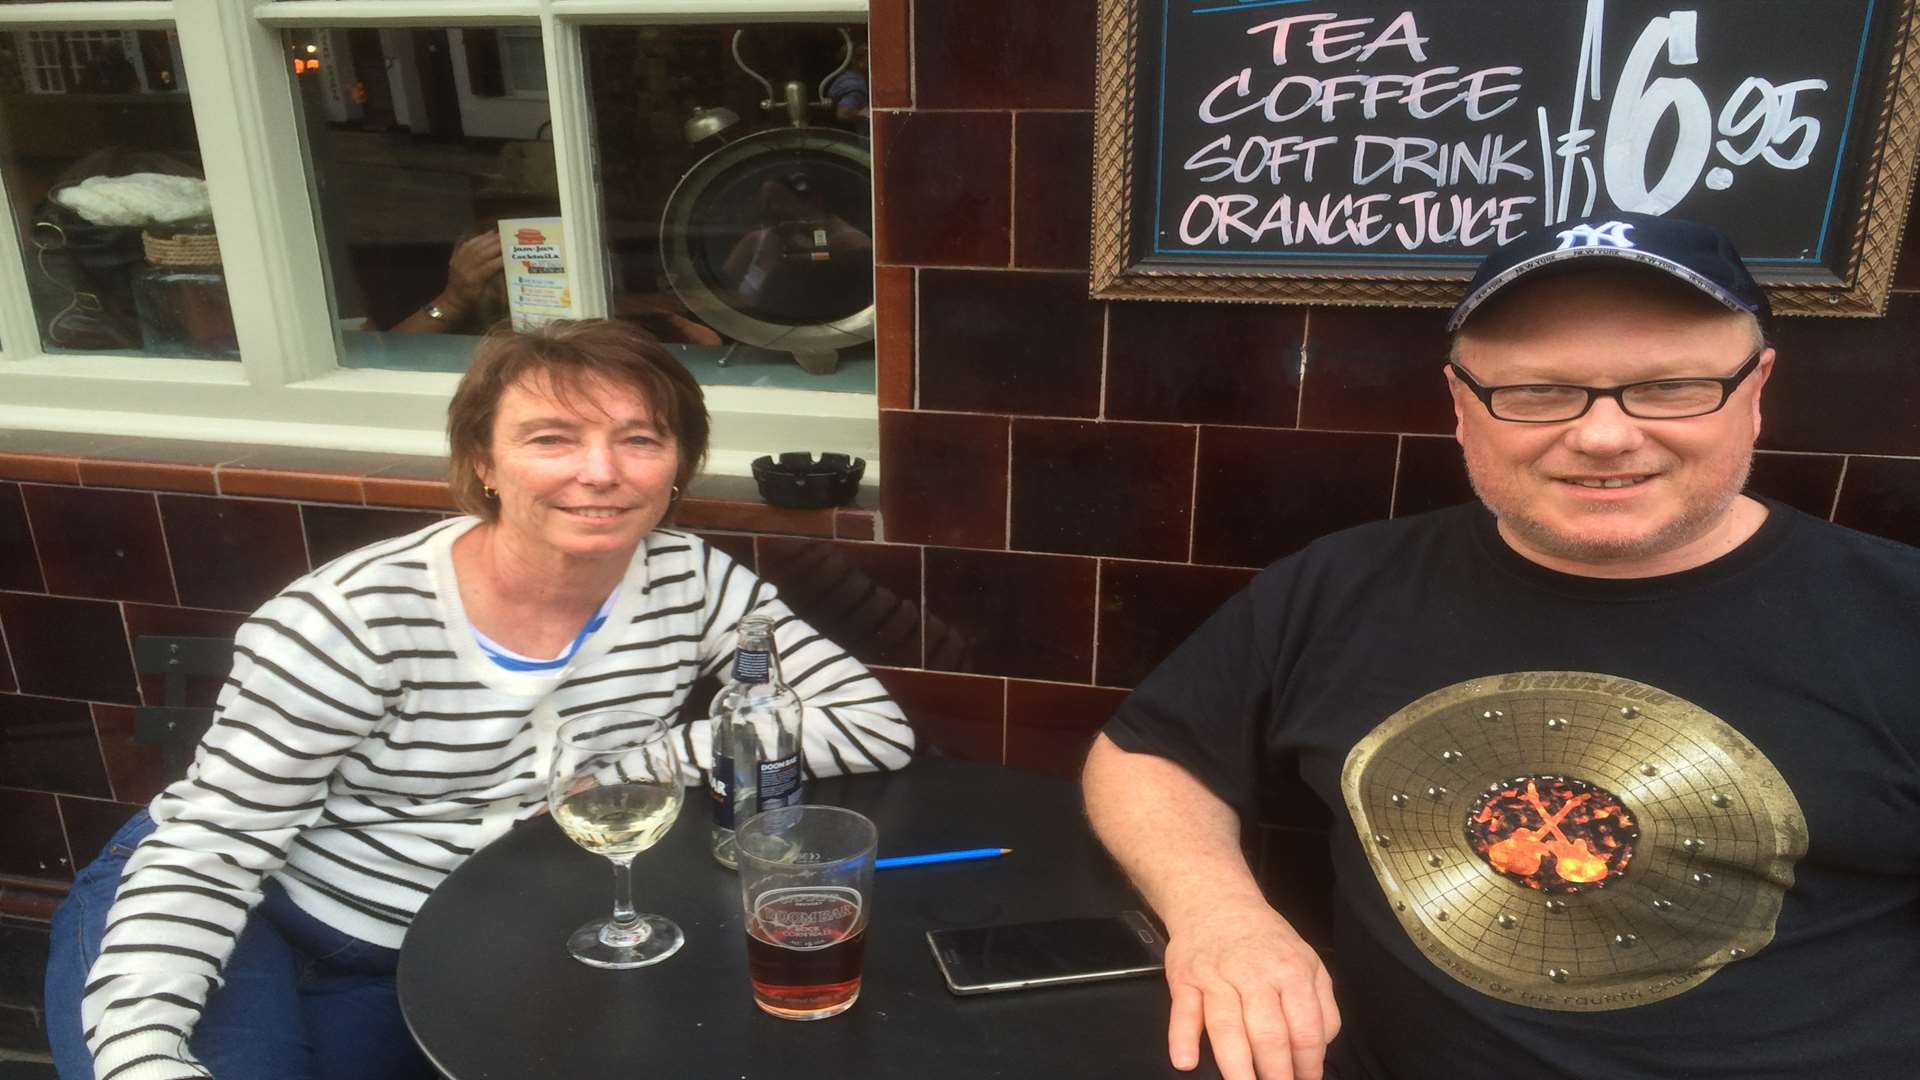 Peter and Jenny Smith, from Melbourne, Australia, travelled a long way to find the Status Quo gig was cancelled